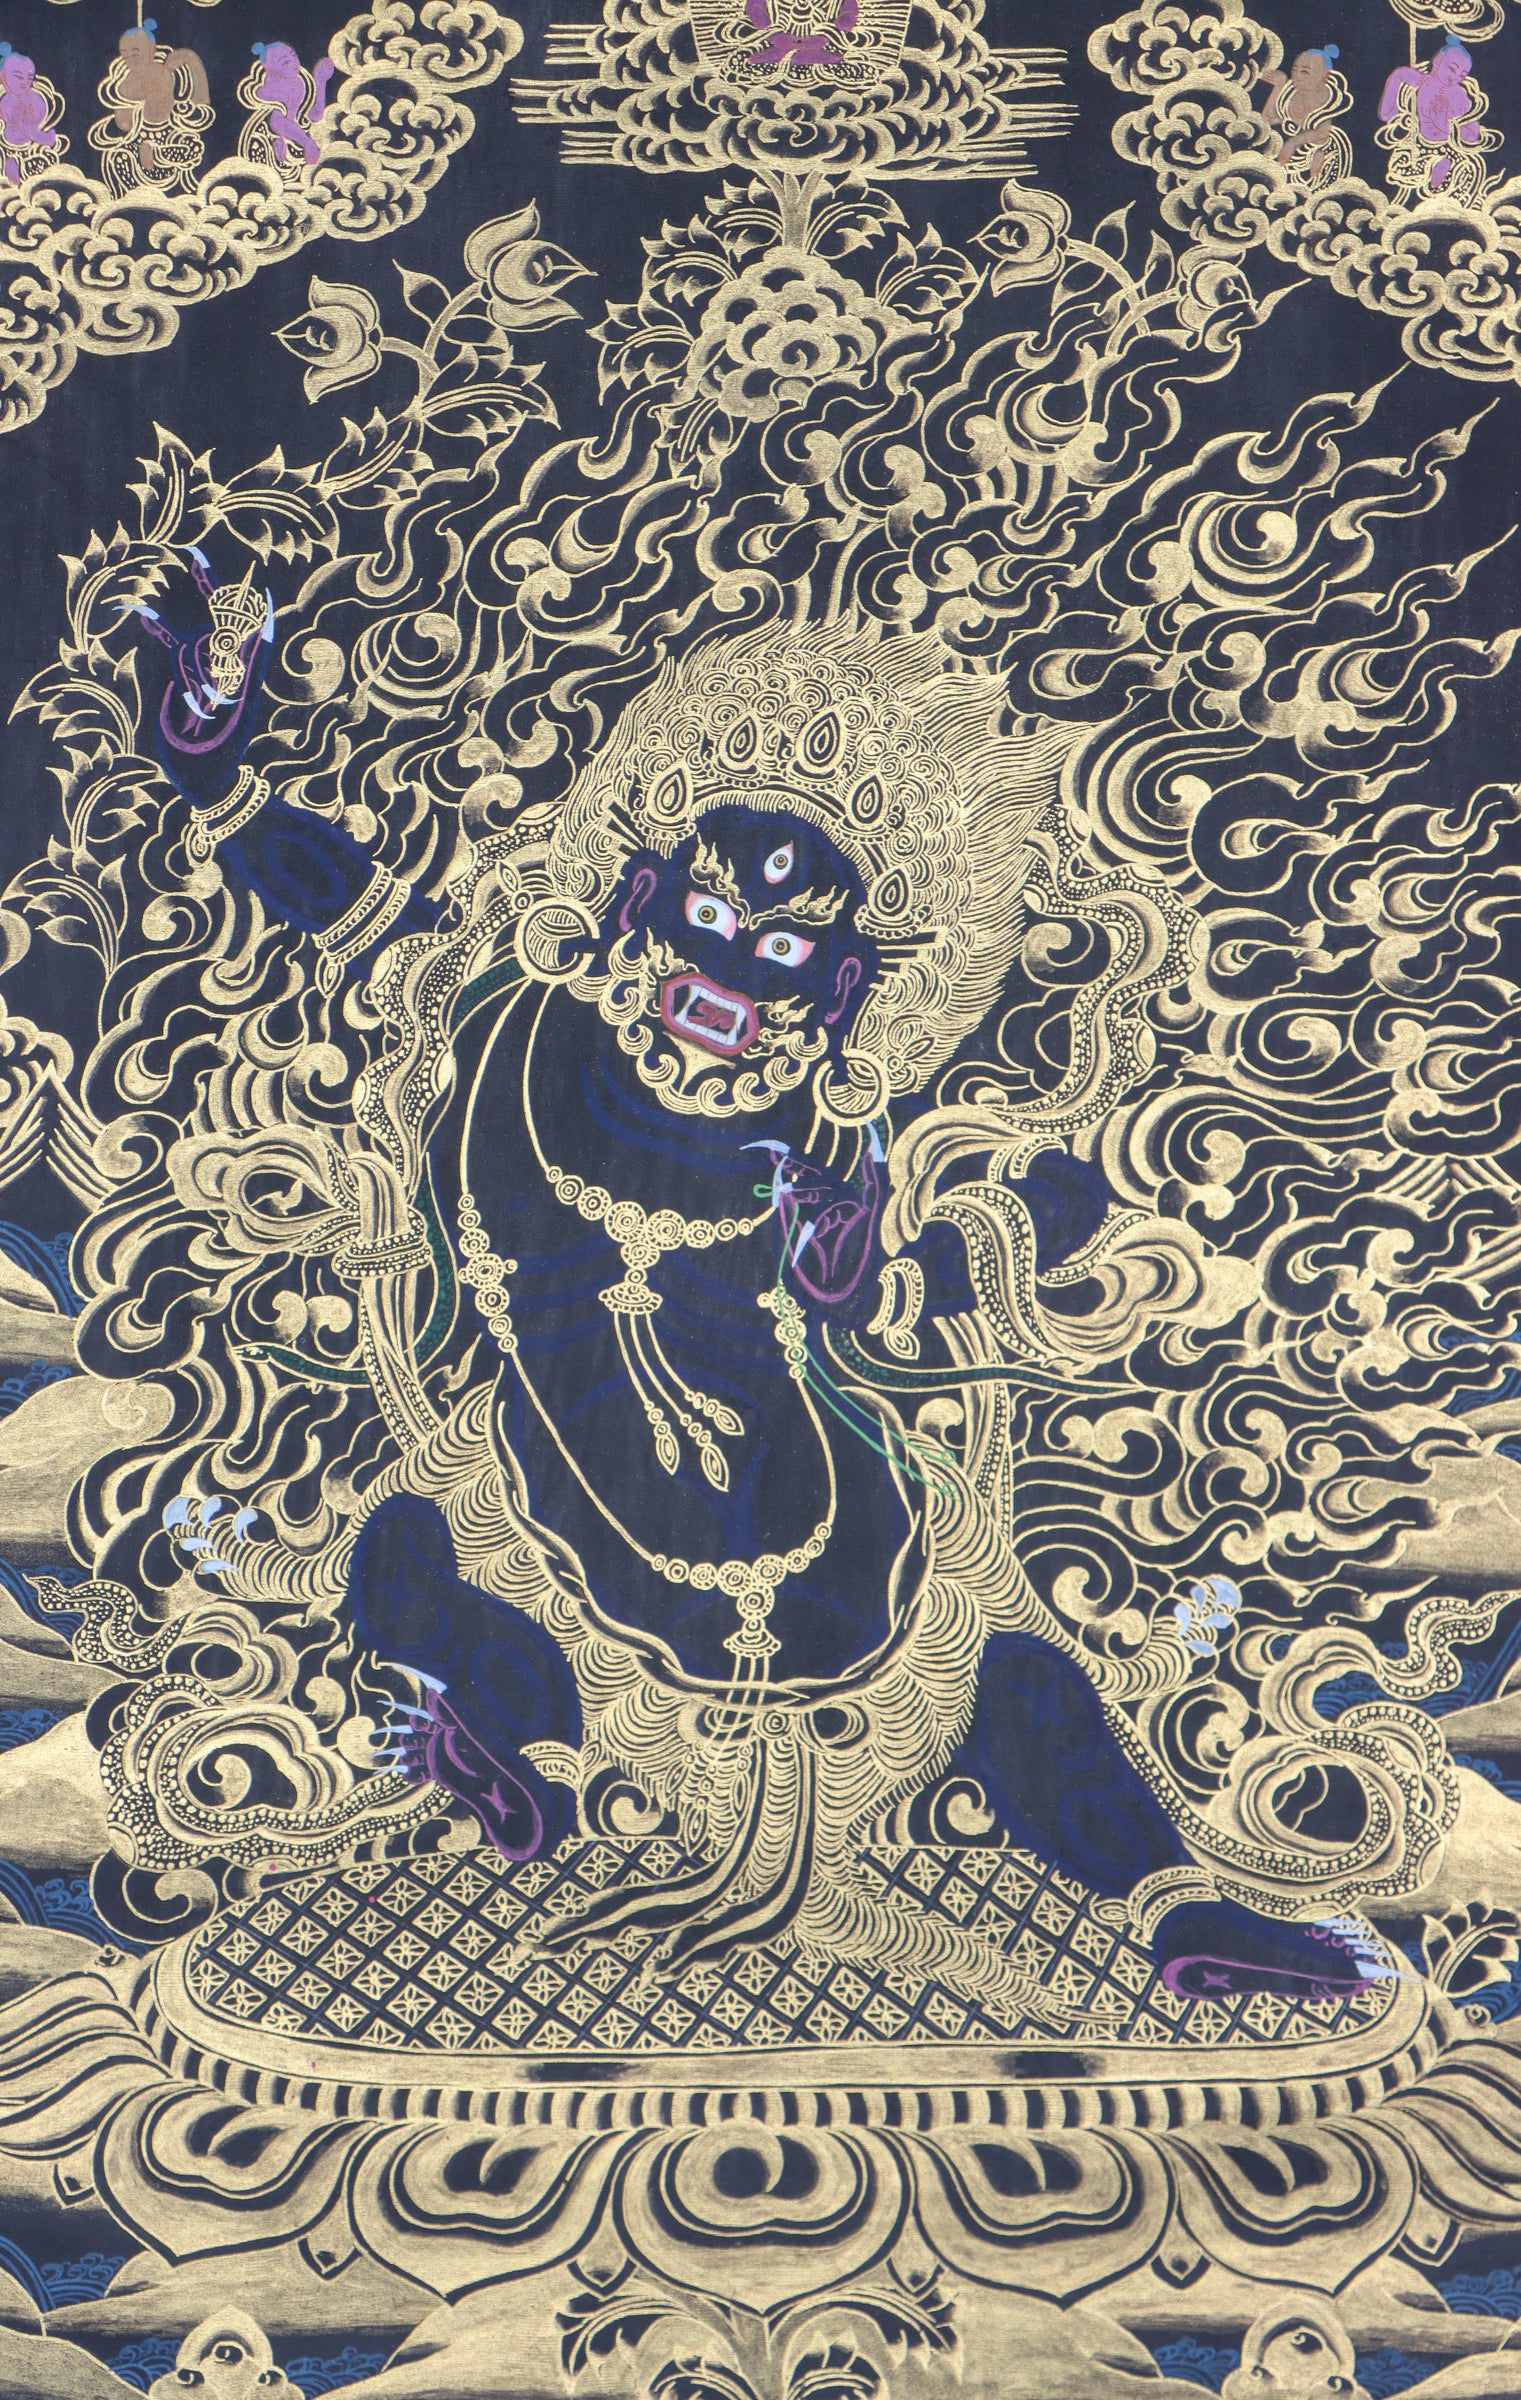 Vajrapani Thangka Painting for power and wisdom.